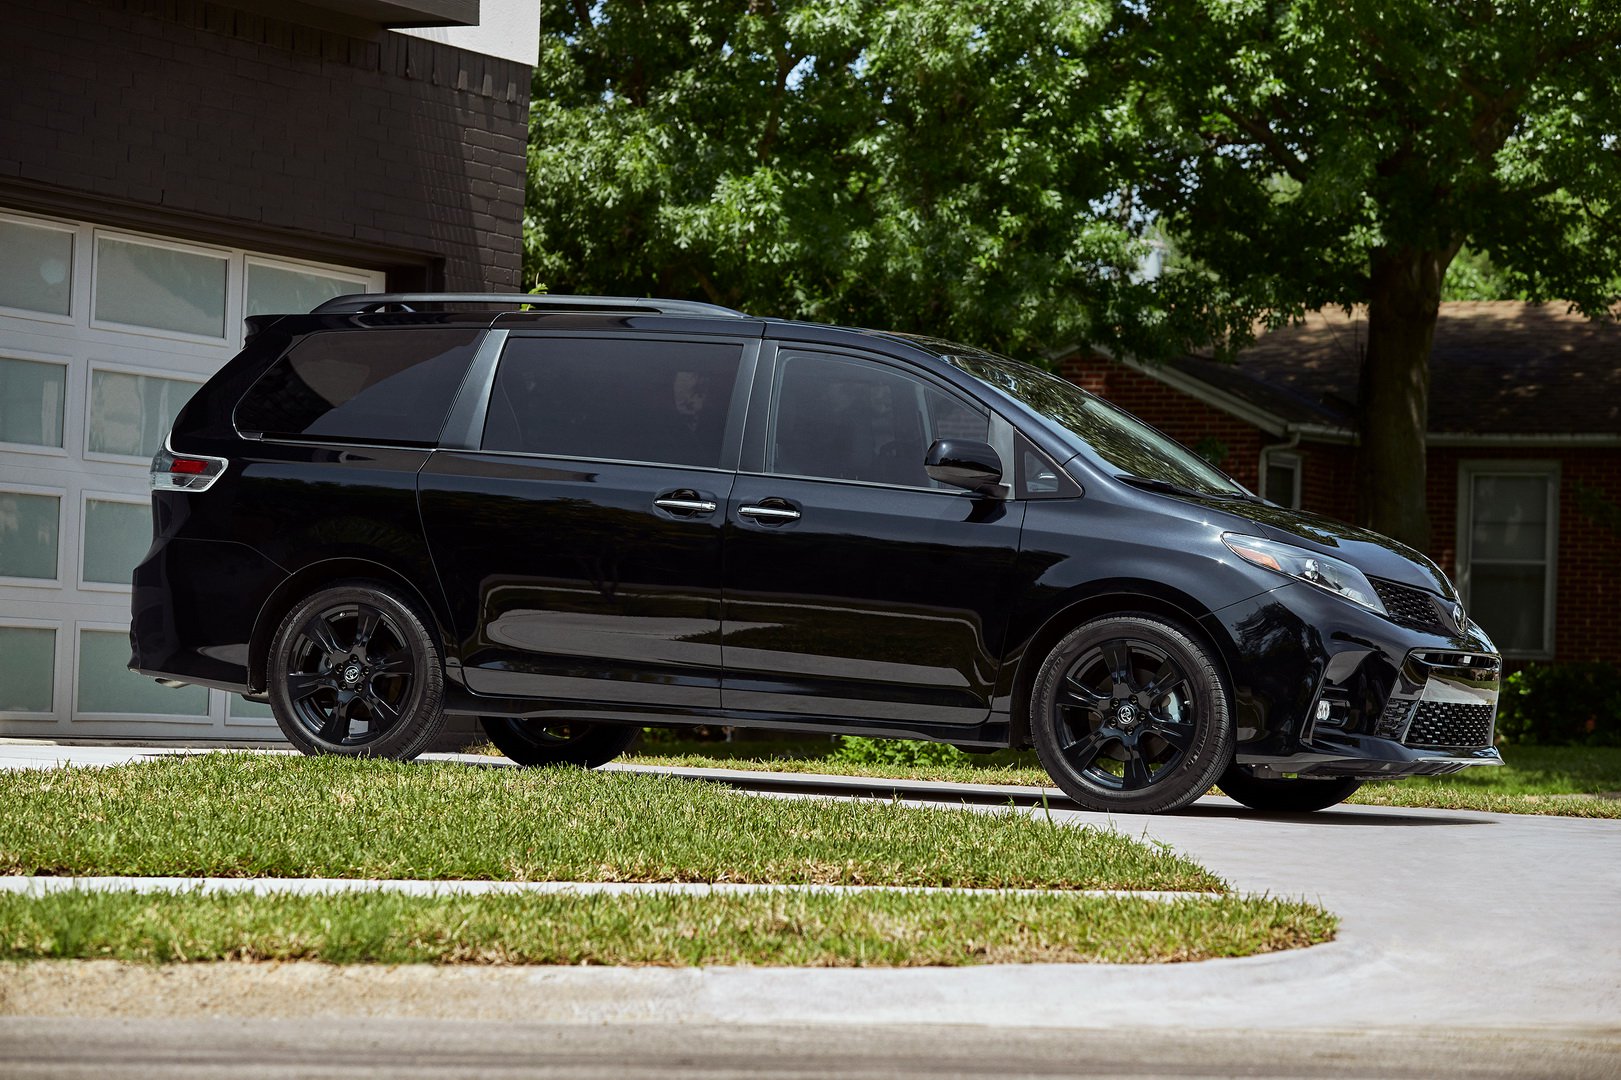 2020 Toyota Sienna Nightshade Edition Adds $700 To the Retail Price ...